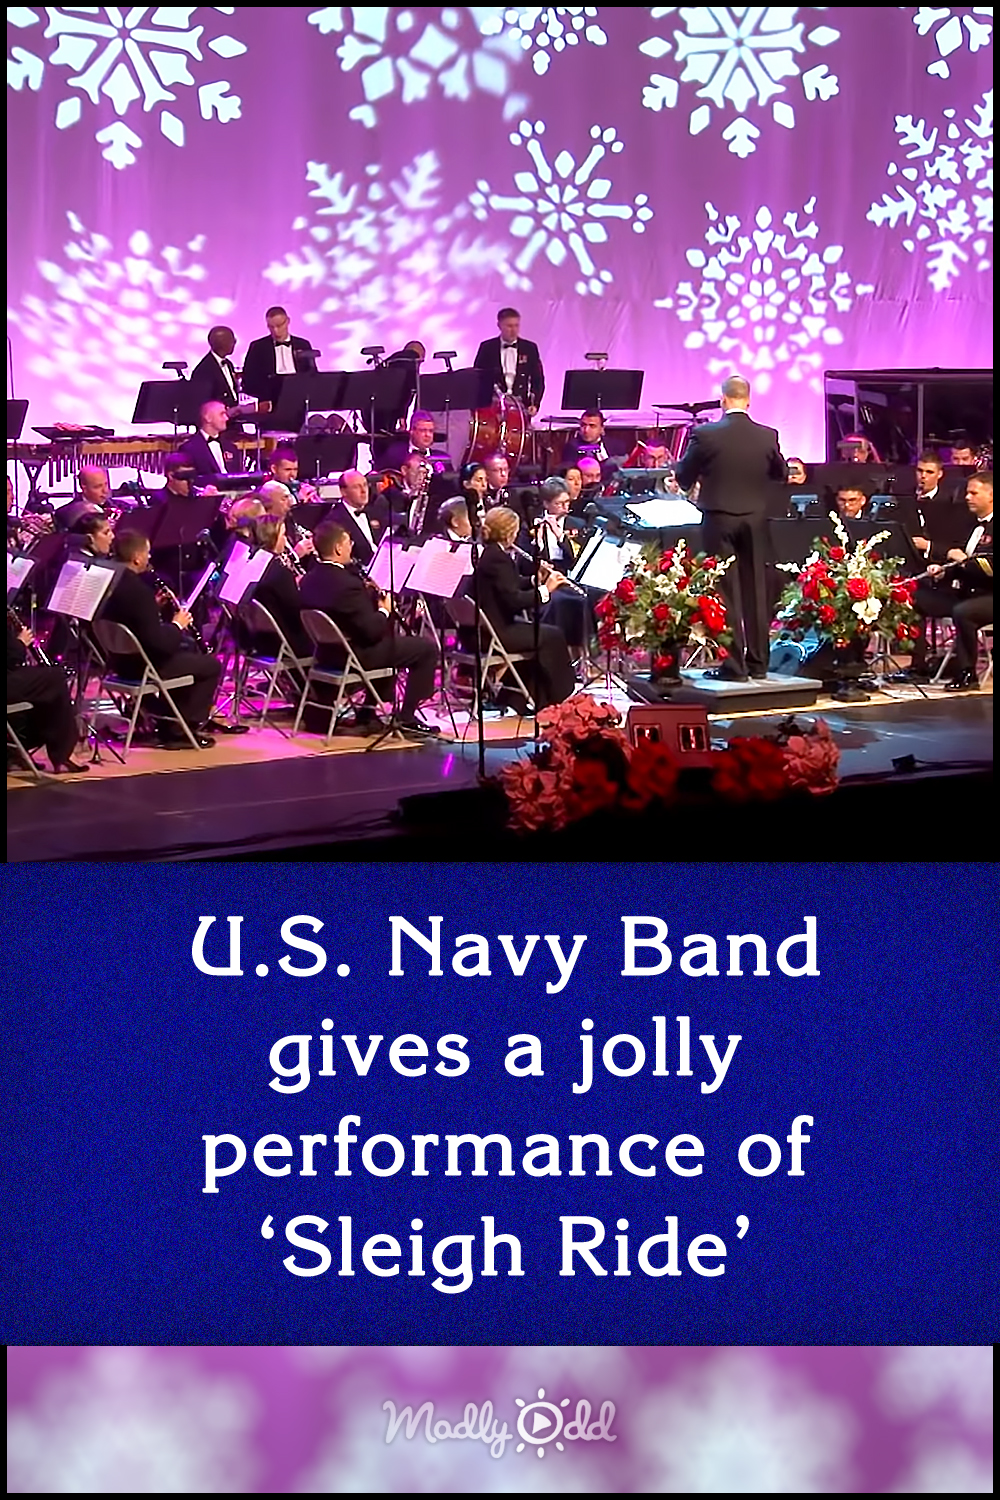 U.S. Navy Band gives a jolly performance of ‘Sleigh Ride’